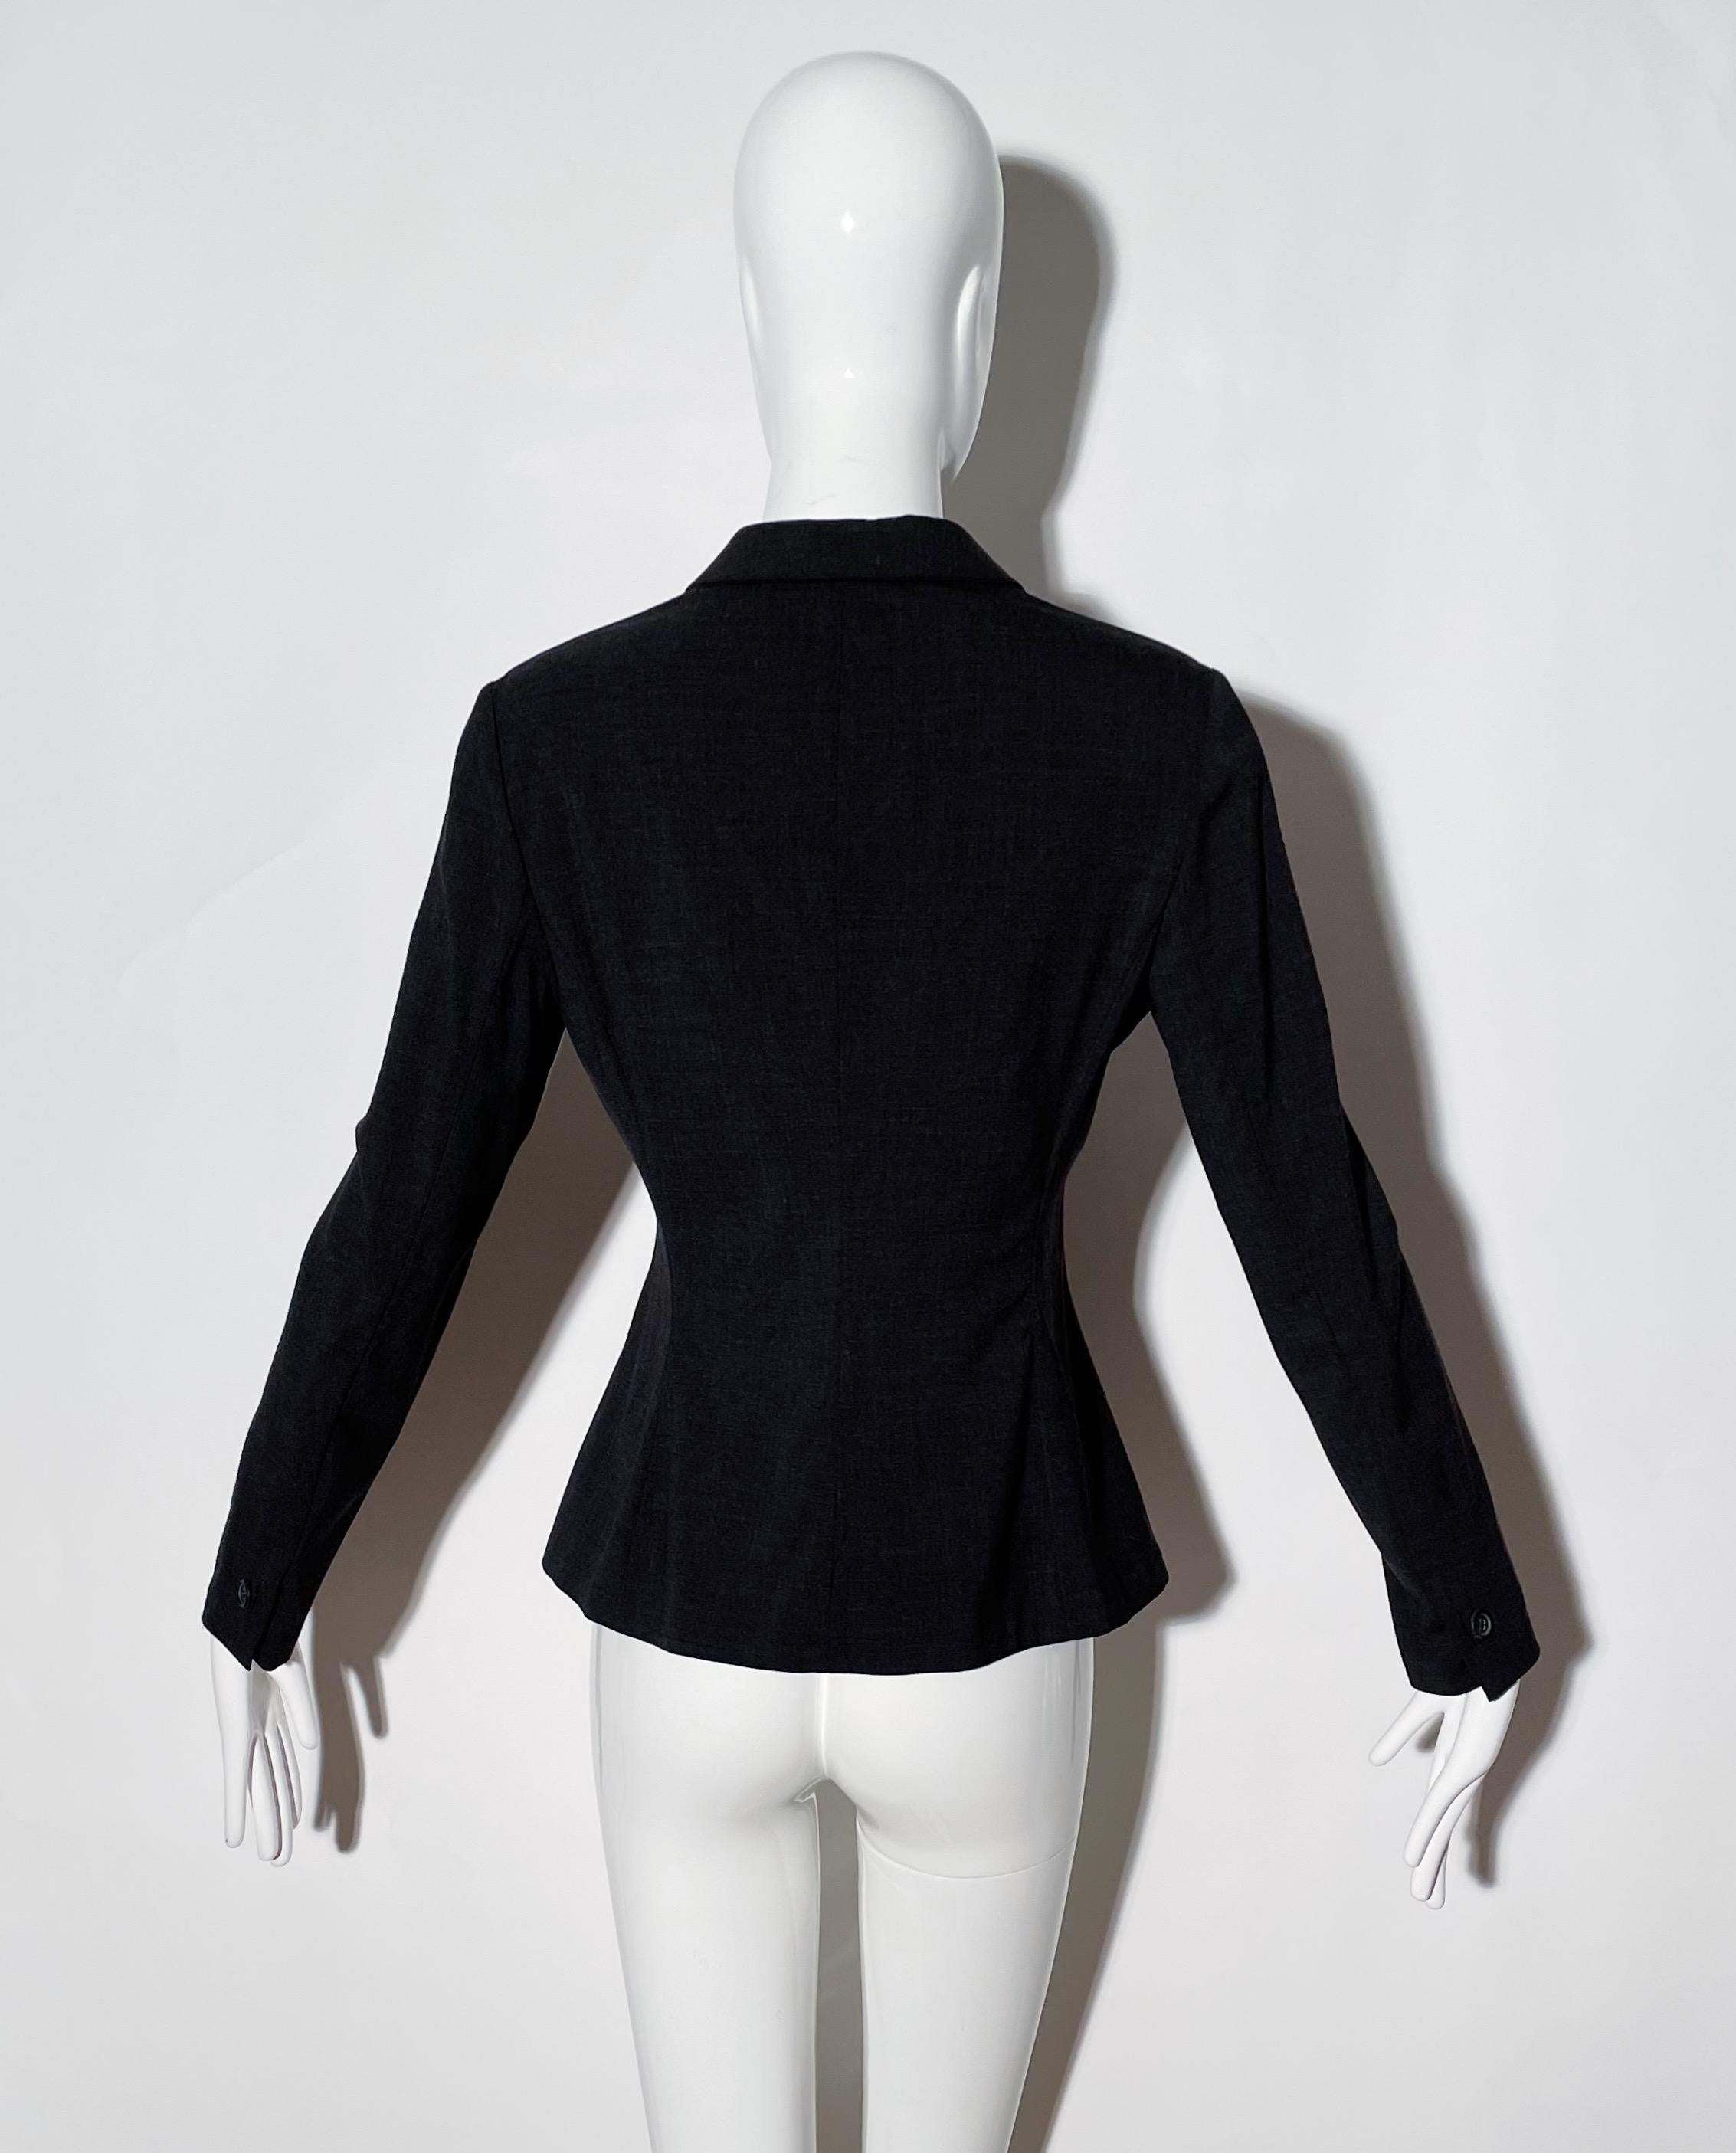 Prada Charcoal Grey Blouse  In Excellent Condition For Sale In Los Angeles, CA